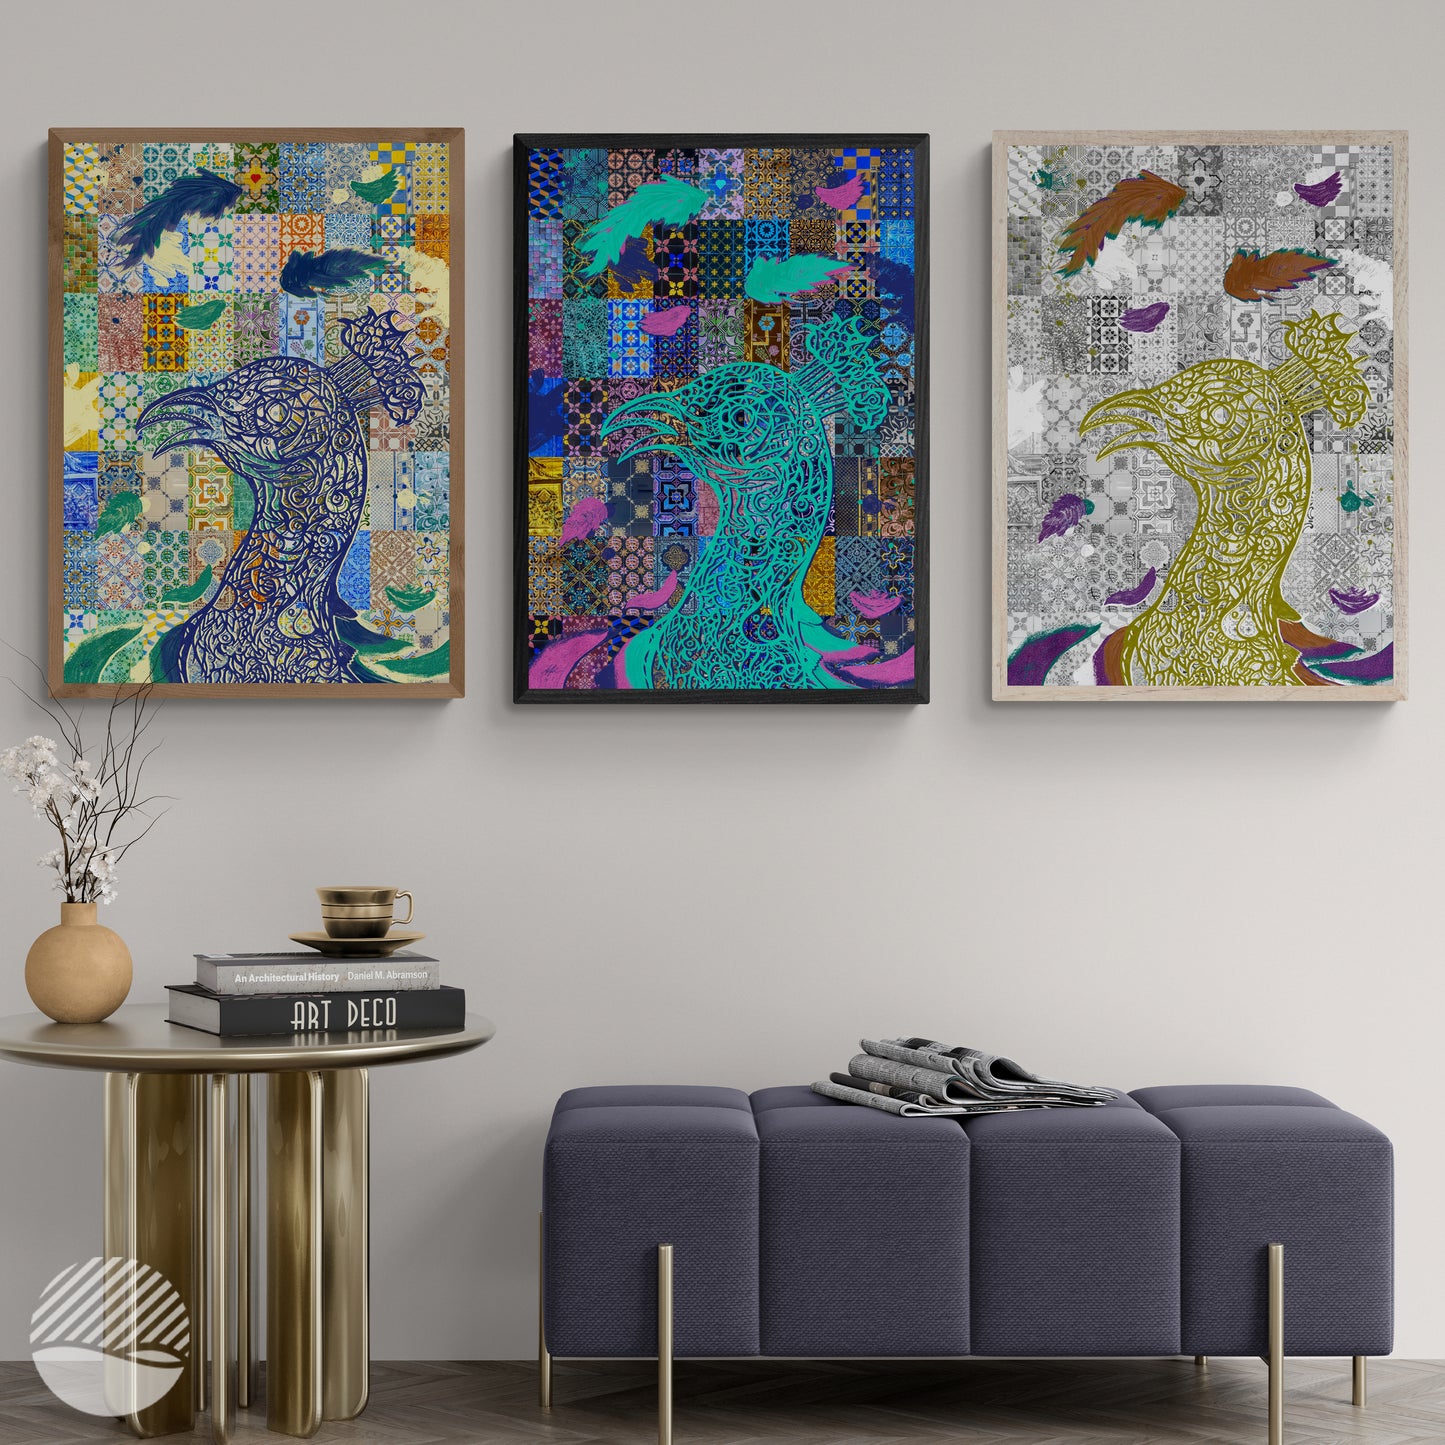 Prominent Peacock by Alan Pedersen - Alantherock - all edition side by side in lounge